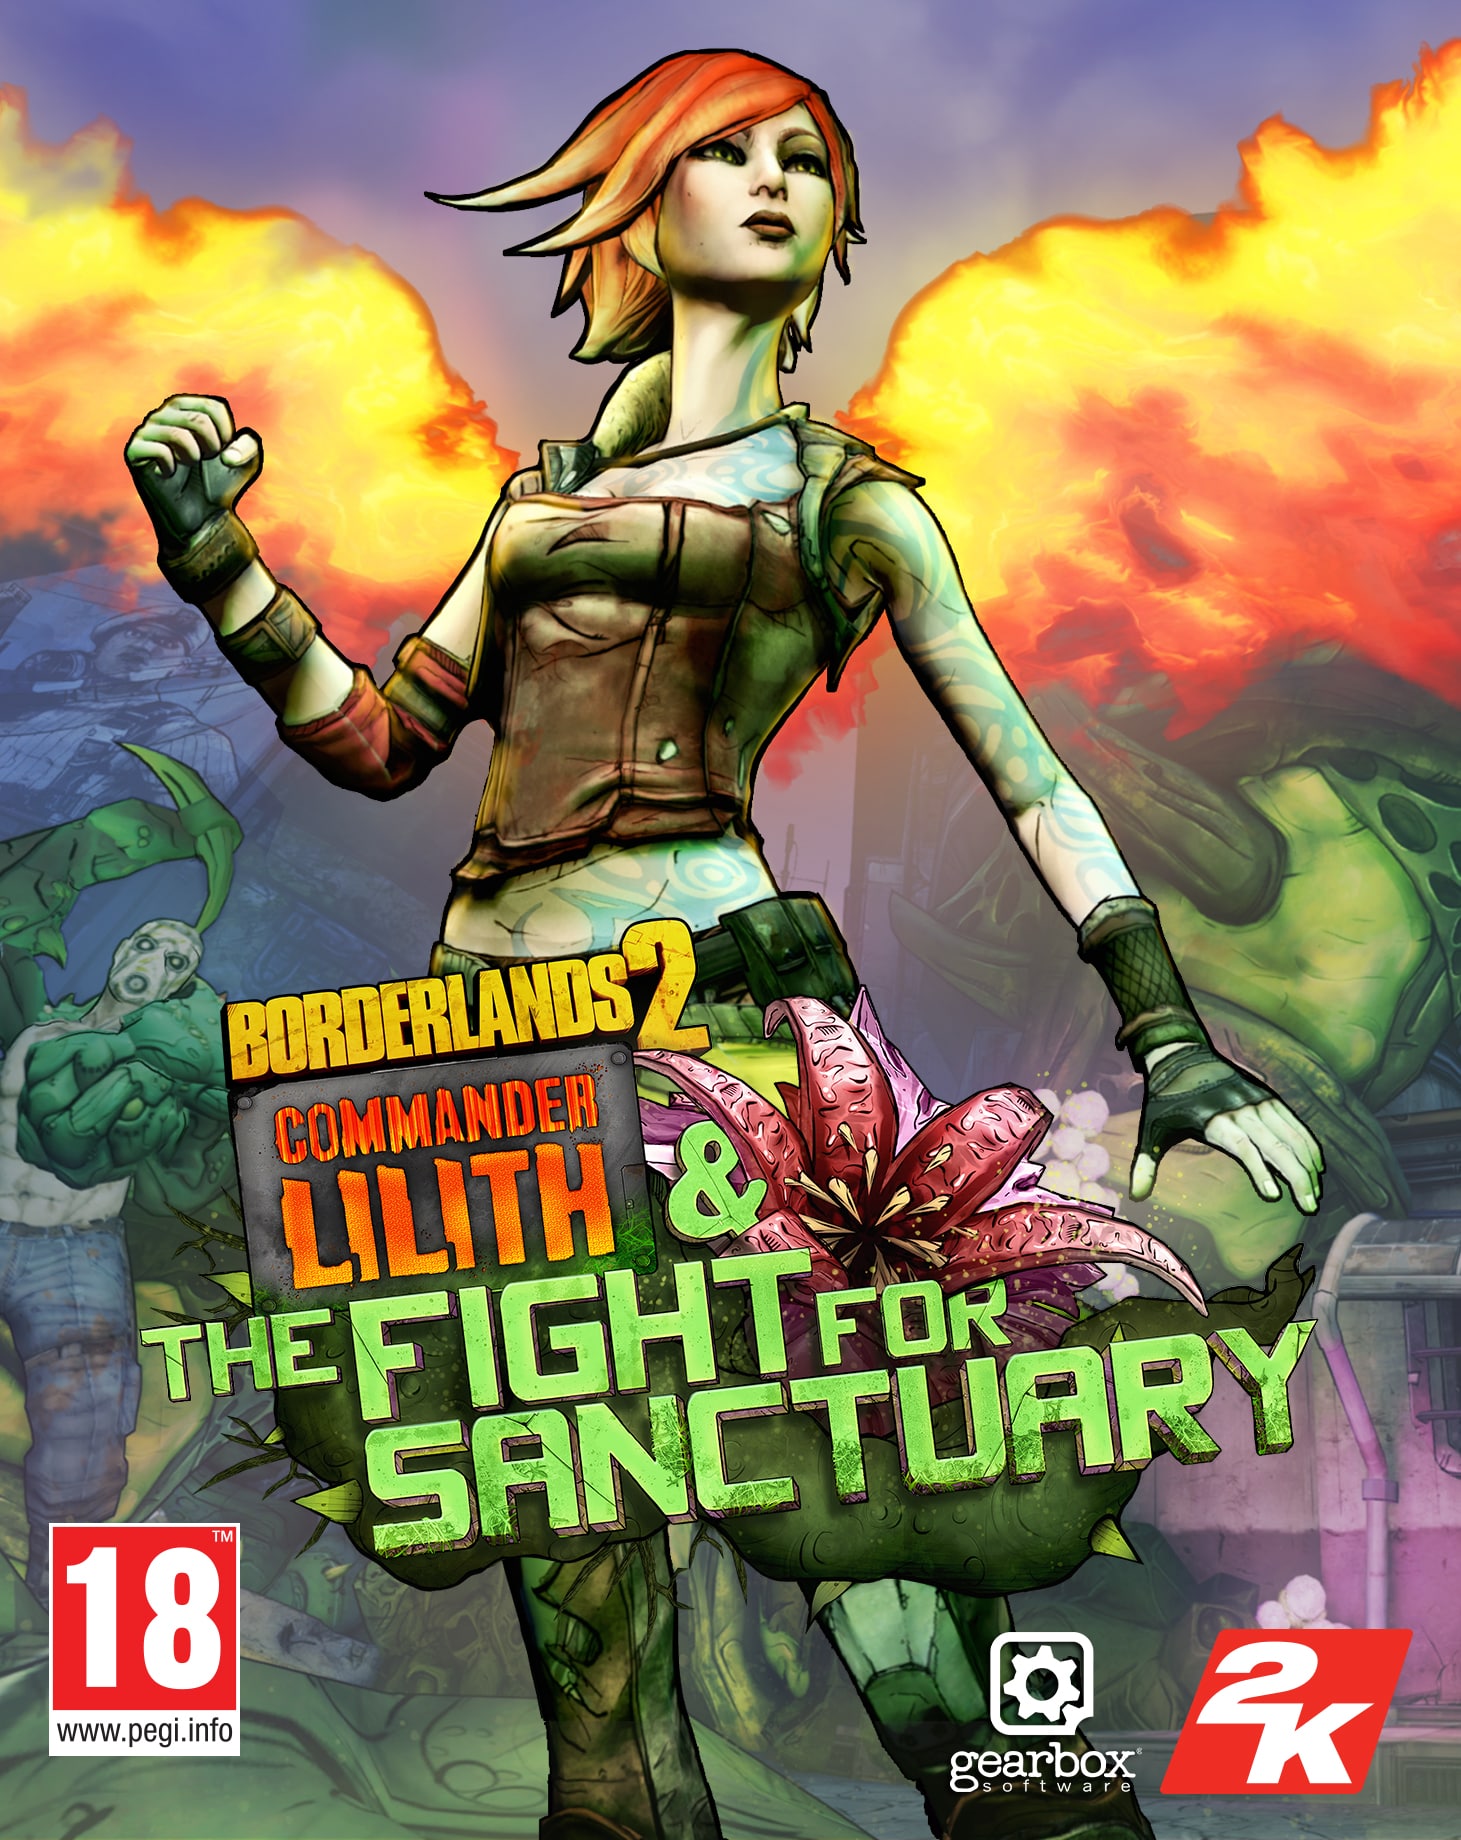 Borderlands 2: Commander Lilith &amp; The Fight for Sanctuary